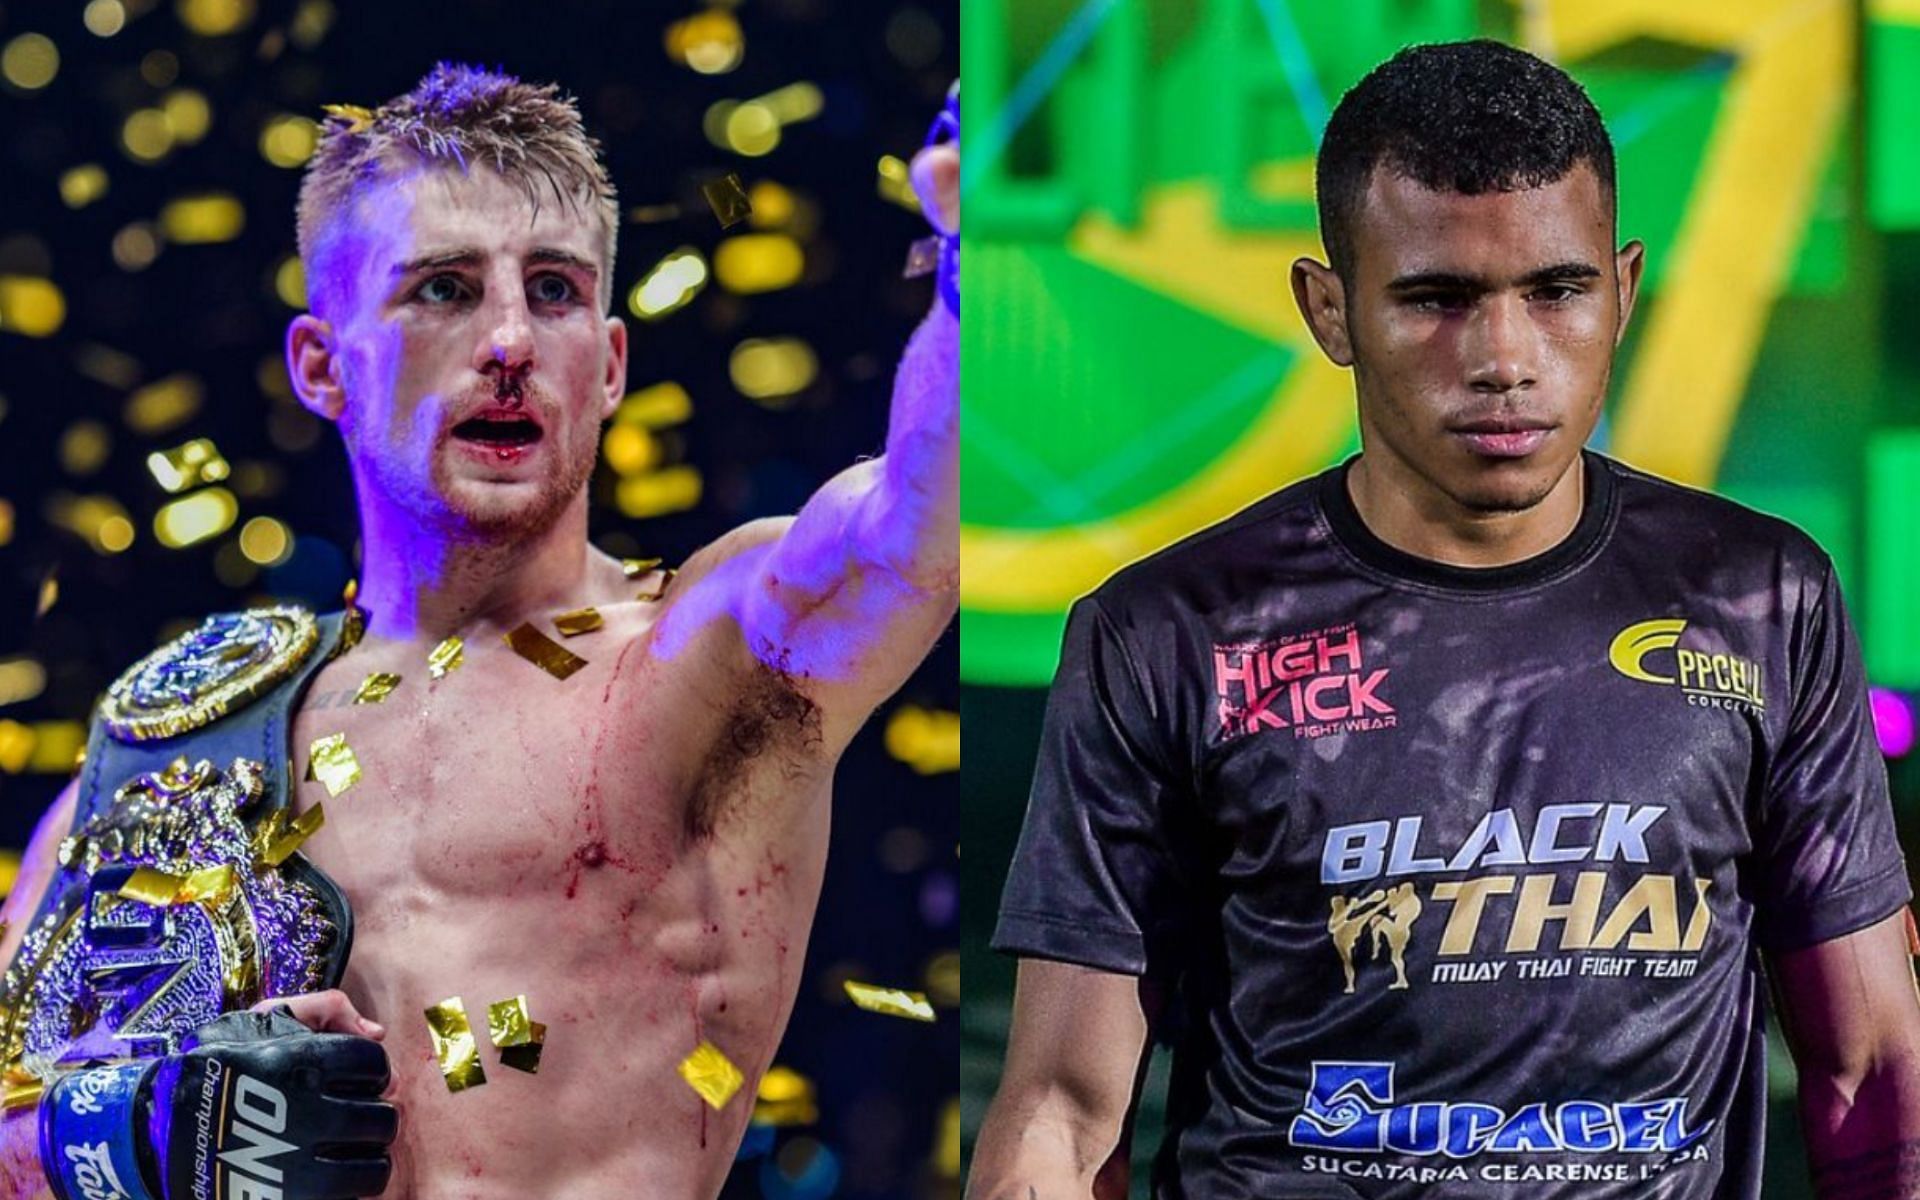 Jonathan Haggerty (left) plans to knock Walter Goncalves (right) out at ONE 157. [Photos ONE Championship]